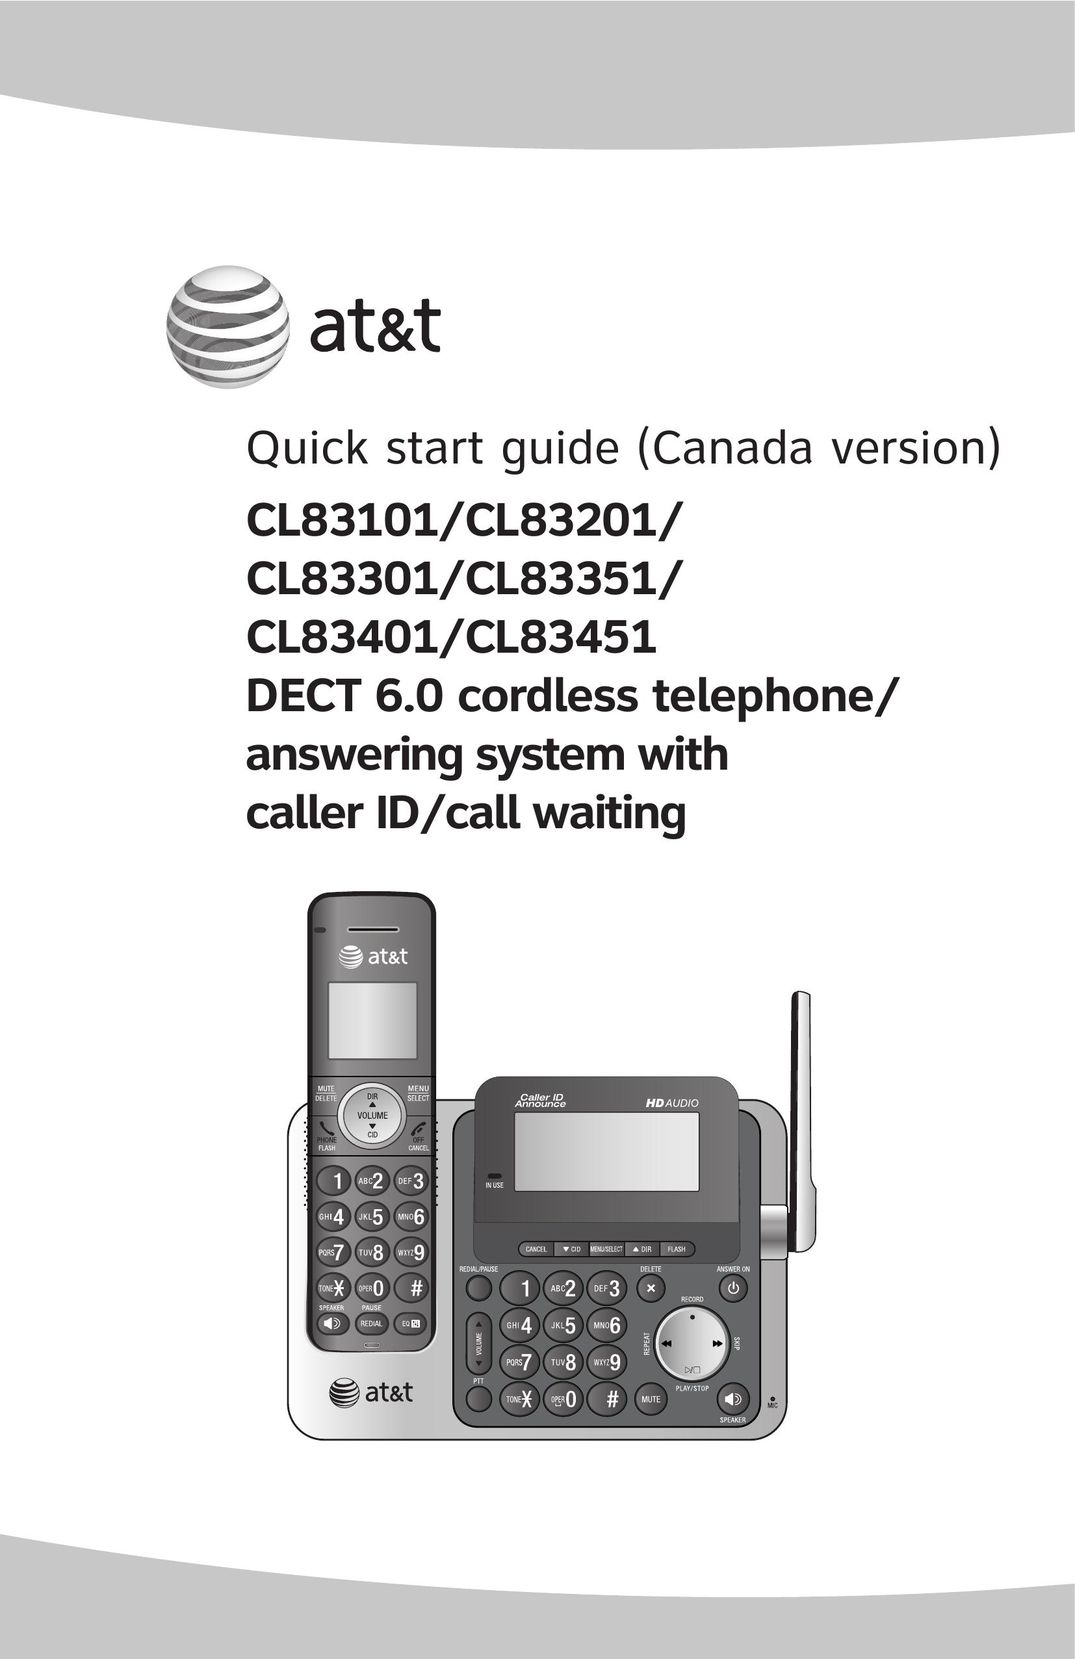 A & T International CL83451 Cordless Telephone User Manual (Page 1)